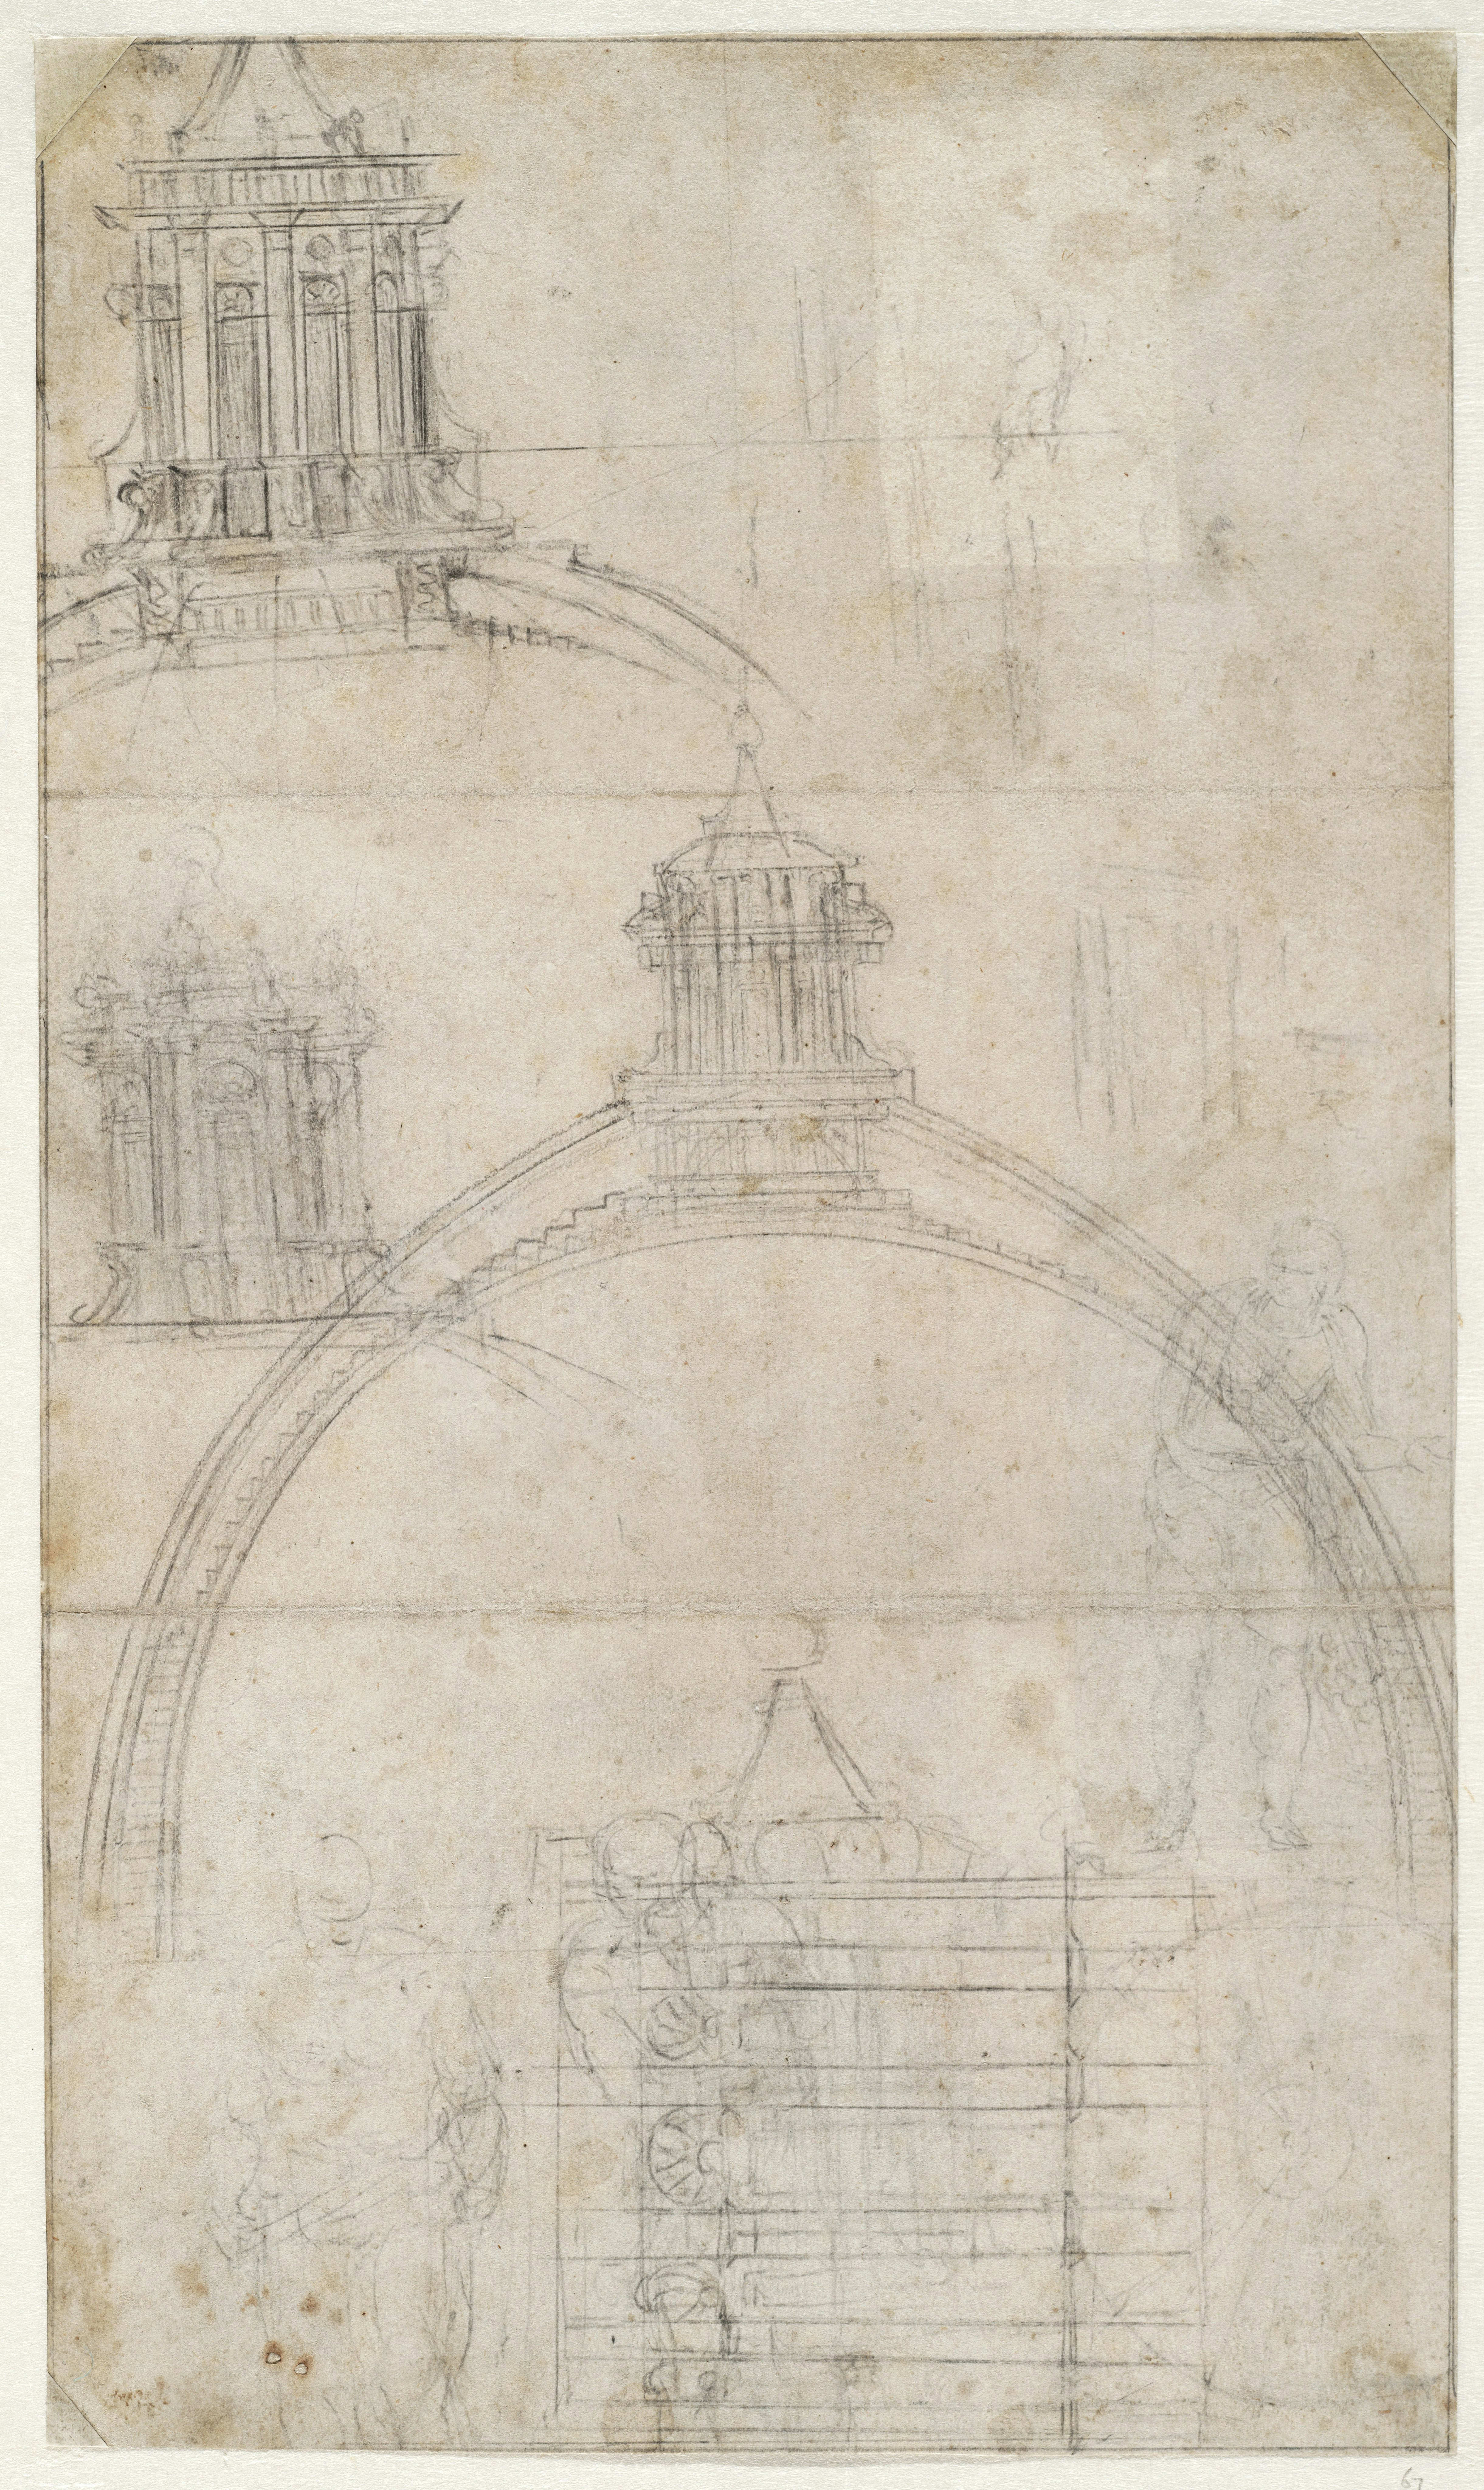 An architectural sketch of the dome of Saint Peter's basilica, black on paper